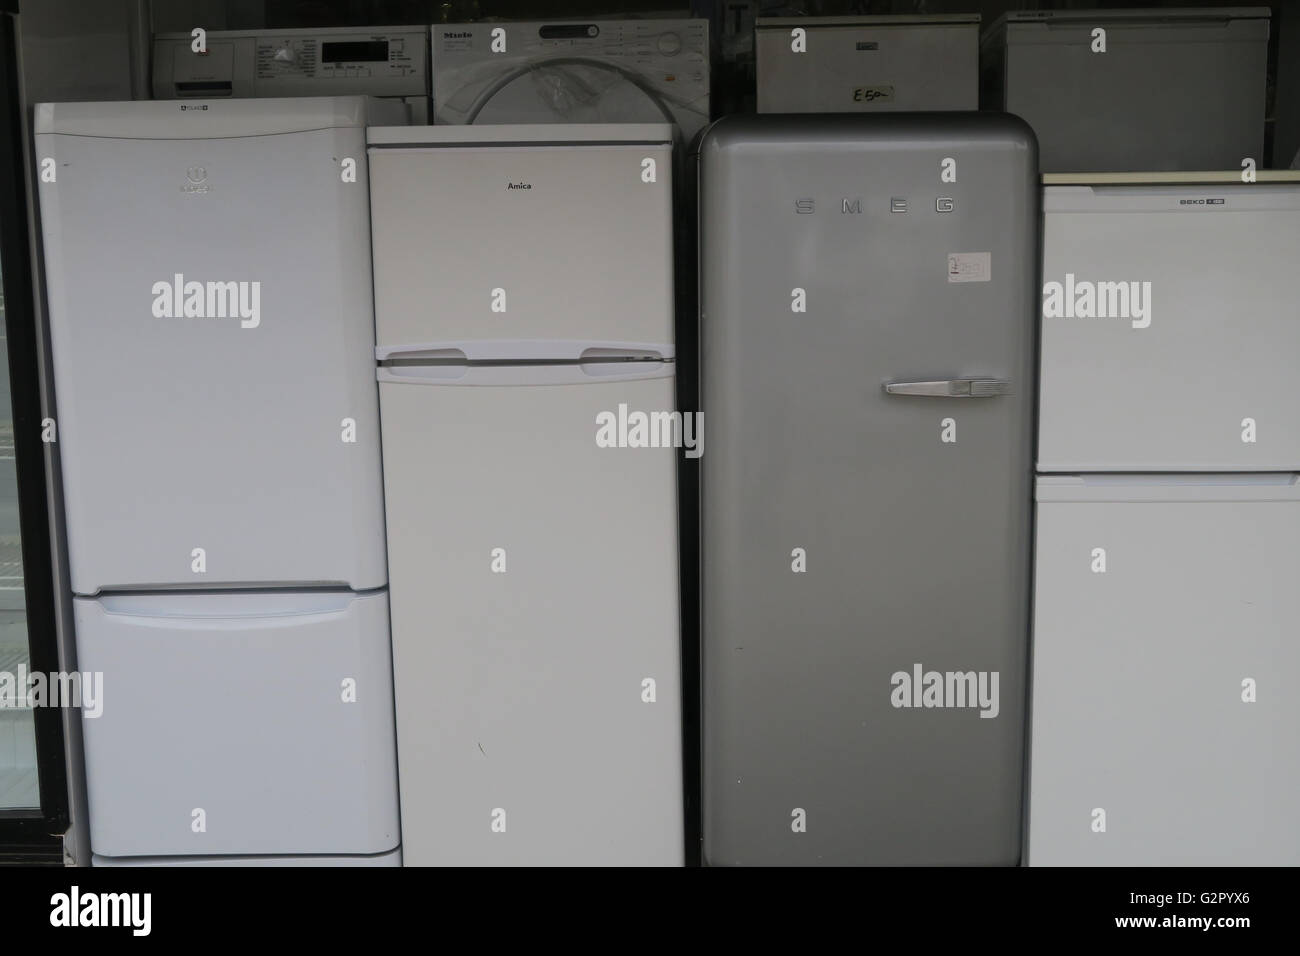 Fridges/Freezers and washing machines for sale outside an electrical appliance shop Stock Photo